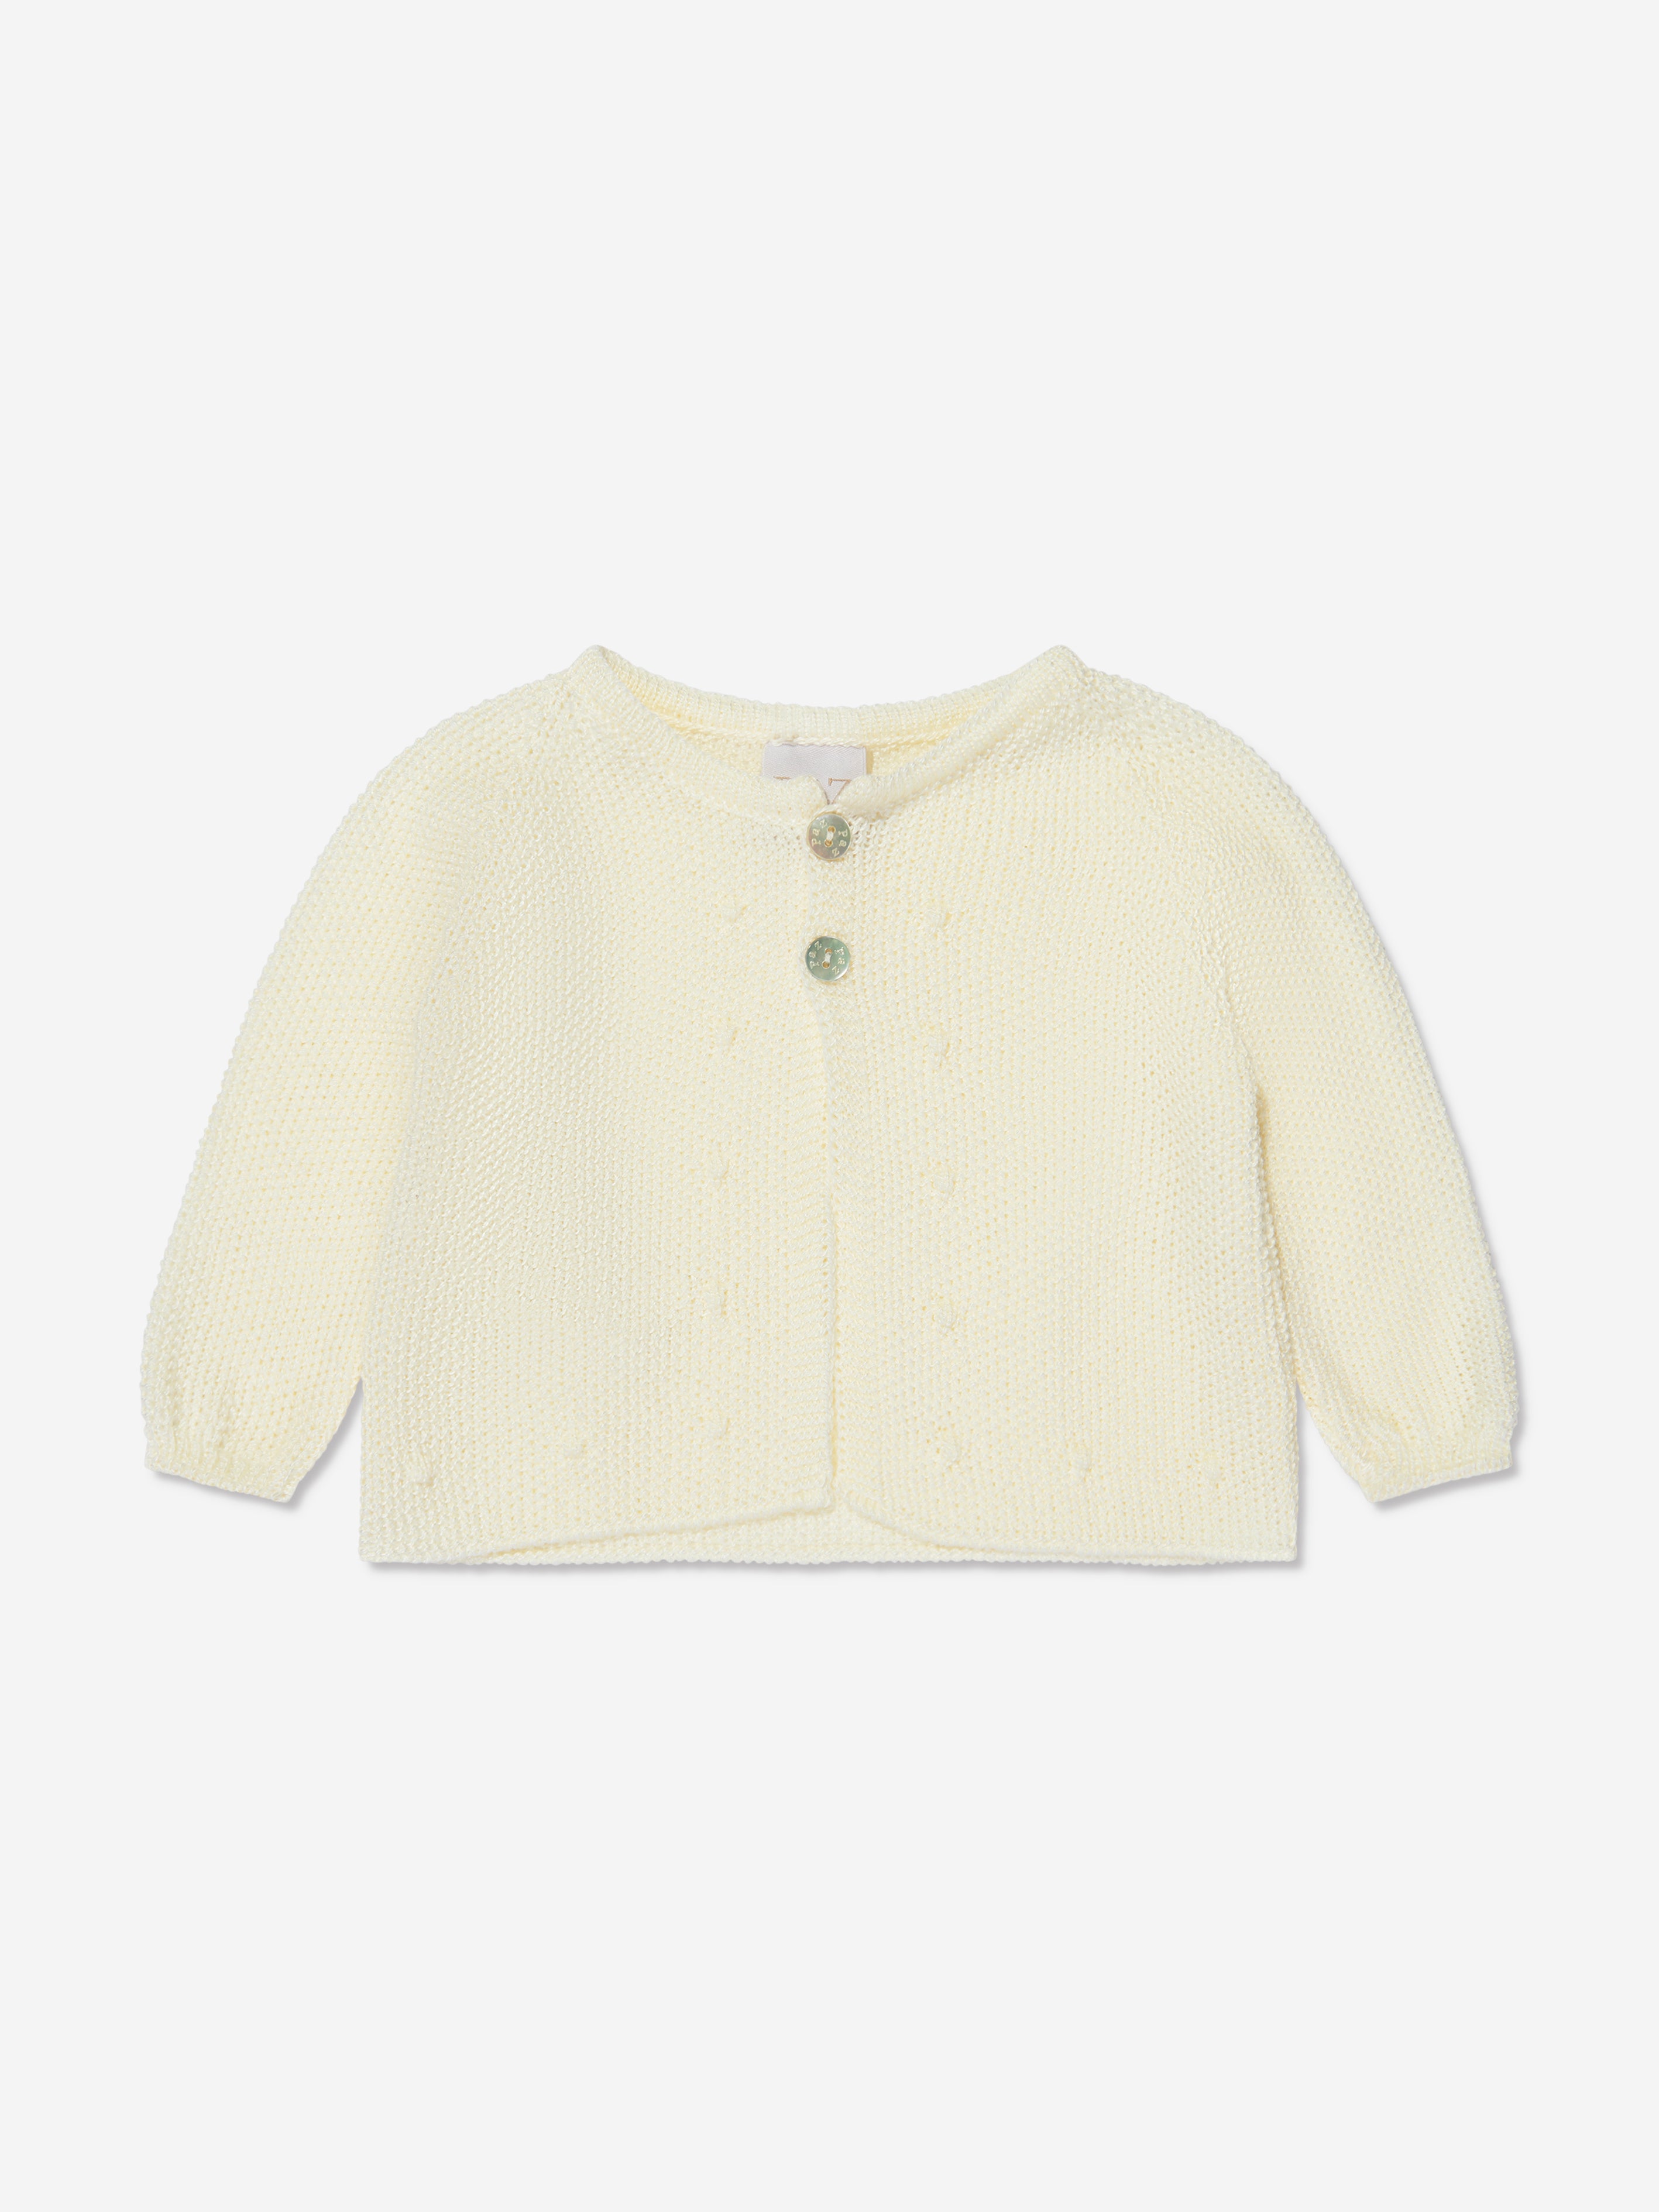 Paz Rodriguez Baby Knitted Cardigan In White